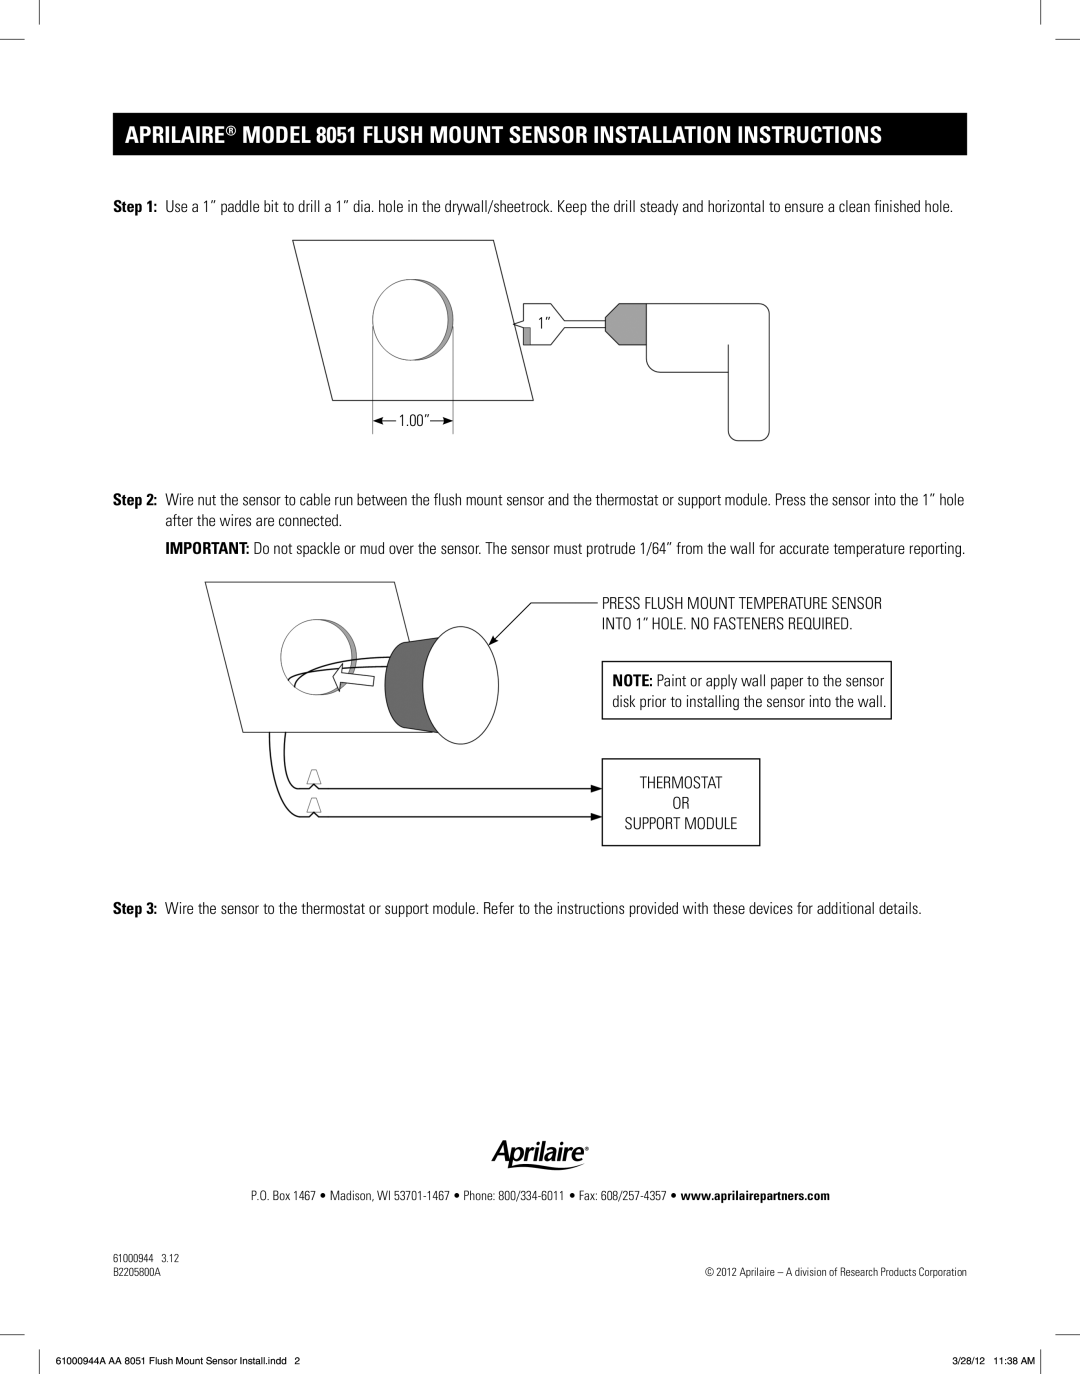 Aprilaire 8051 installation instructions 1” 1.00” 